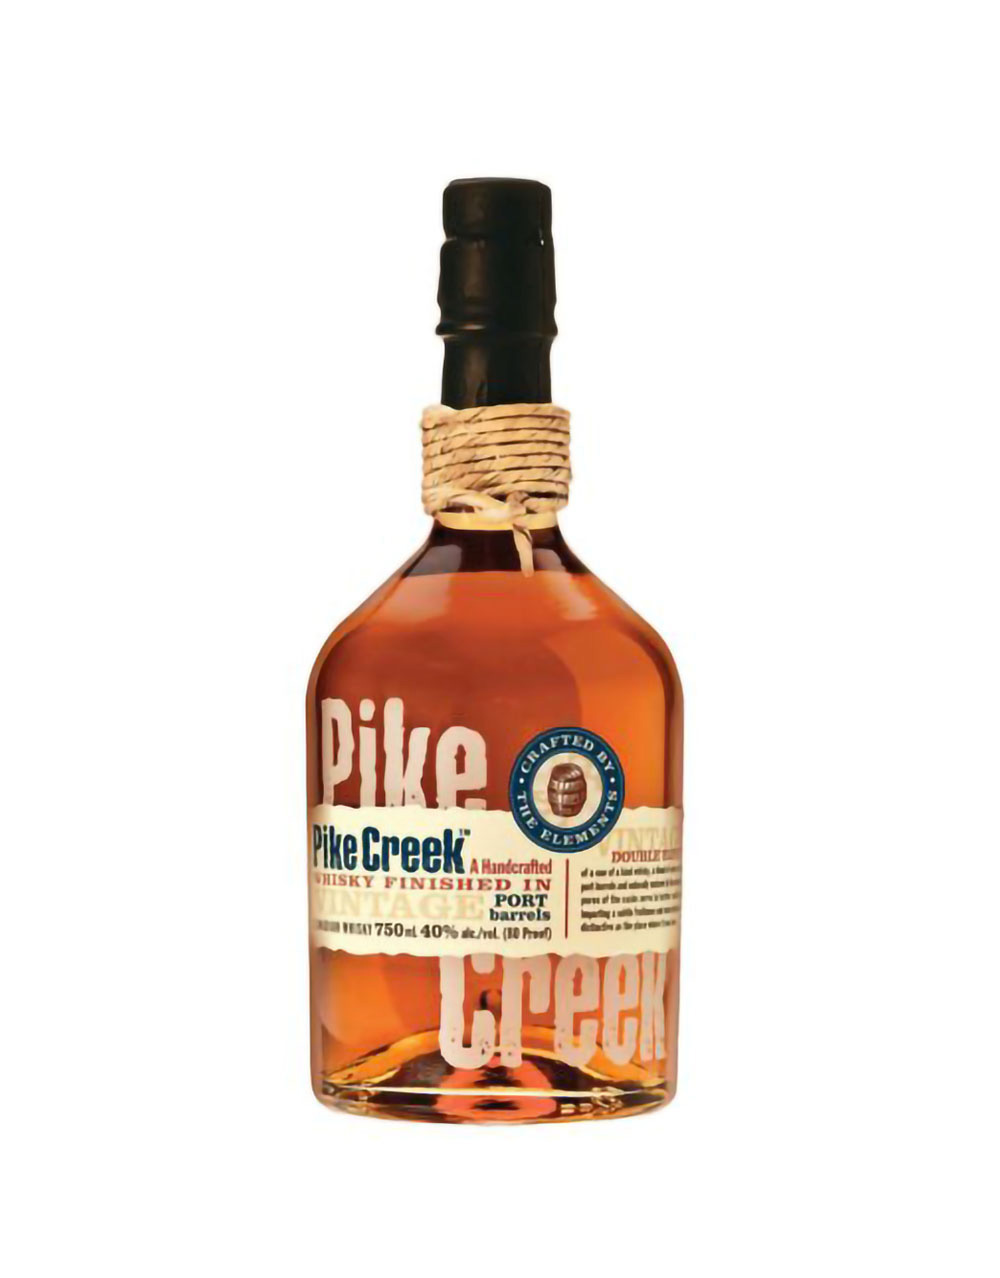 Pike Creek 10 Year Old Rum Barrel Finish Canadian Whisky